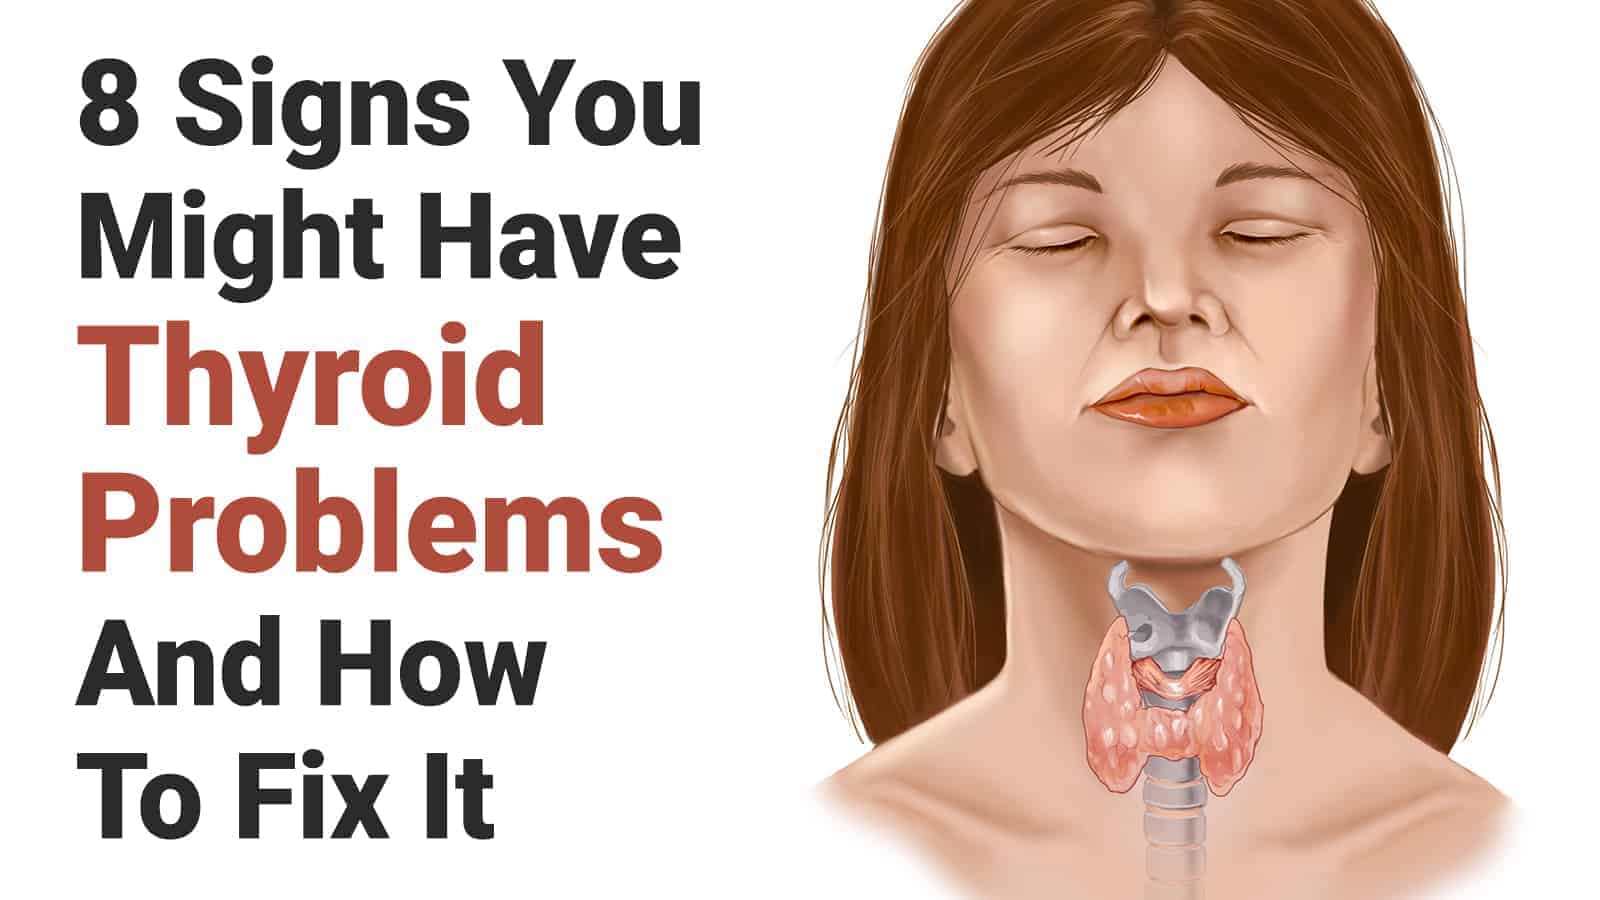 8 Signs You Might Have Thyroid Problems (And How To Fix It)